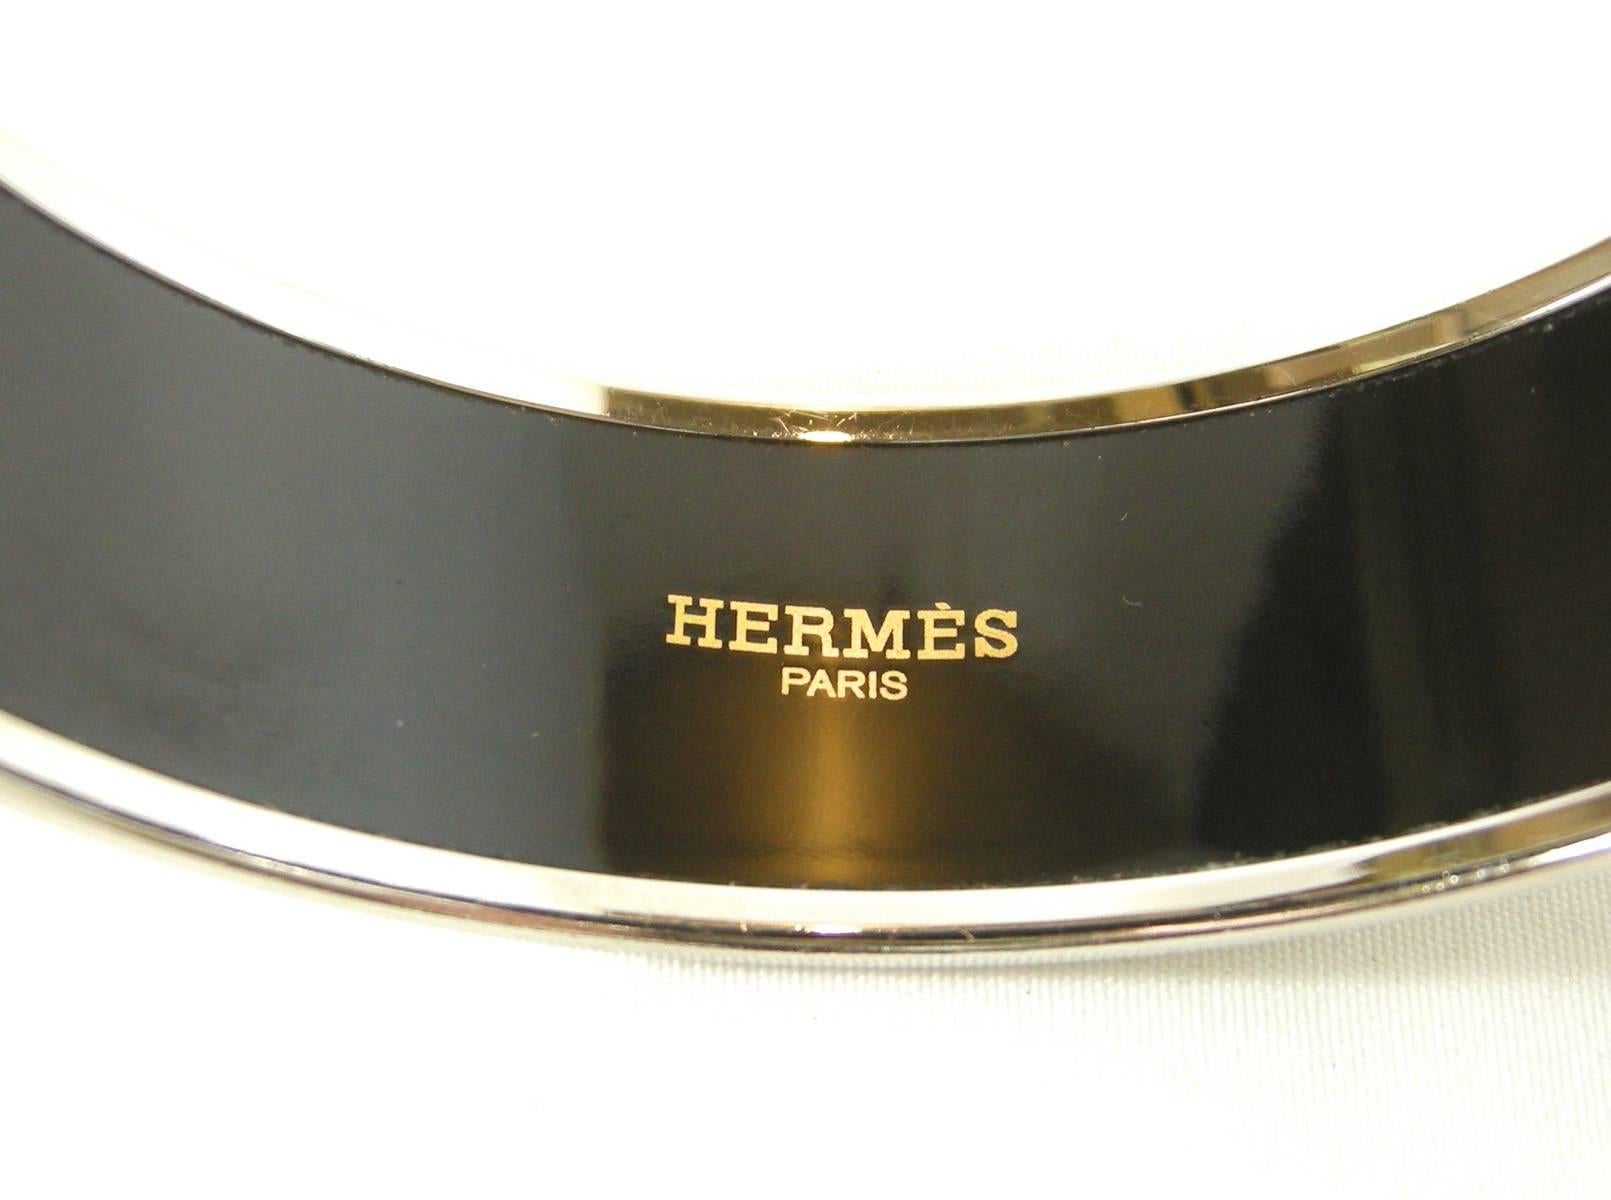 This is a stunning Hermes enamel bangle.  This bracelet color is a predominantly lime green color with white, yellow, and rust colored in intricate designs. This bracelet measures 3/4